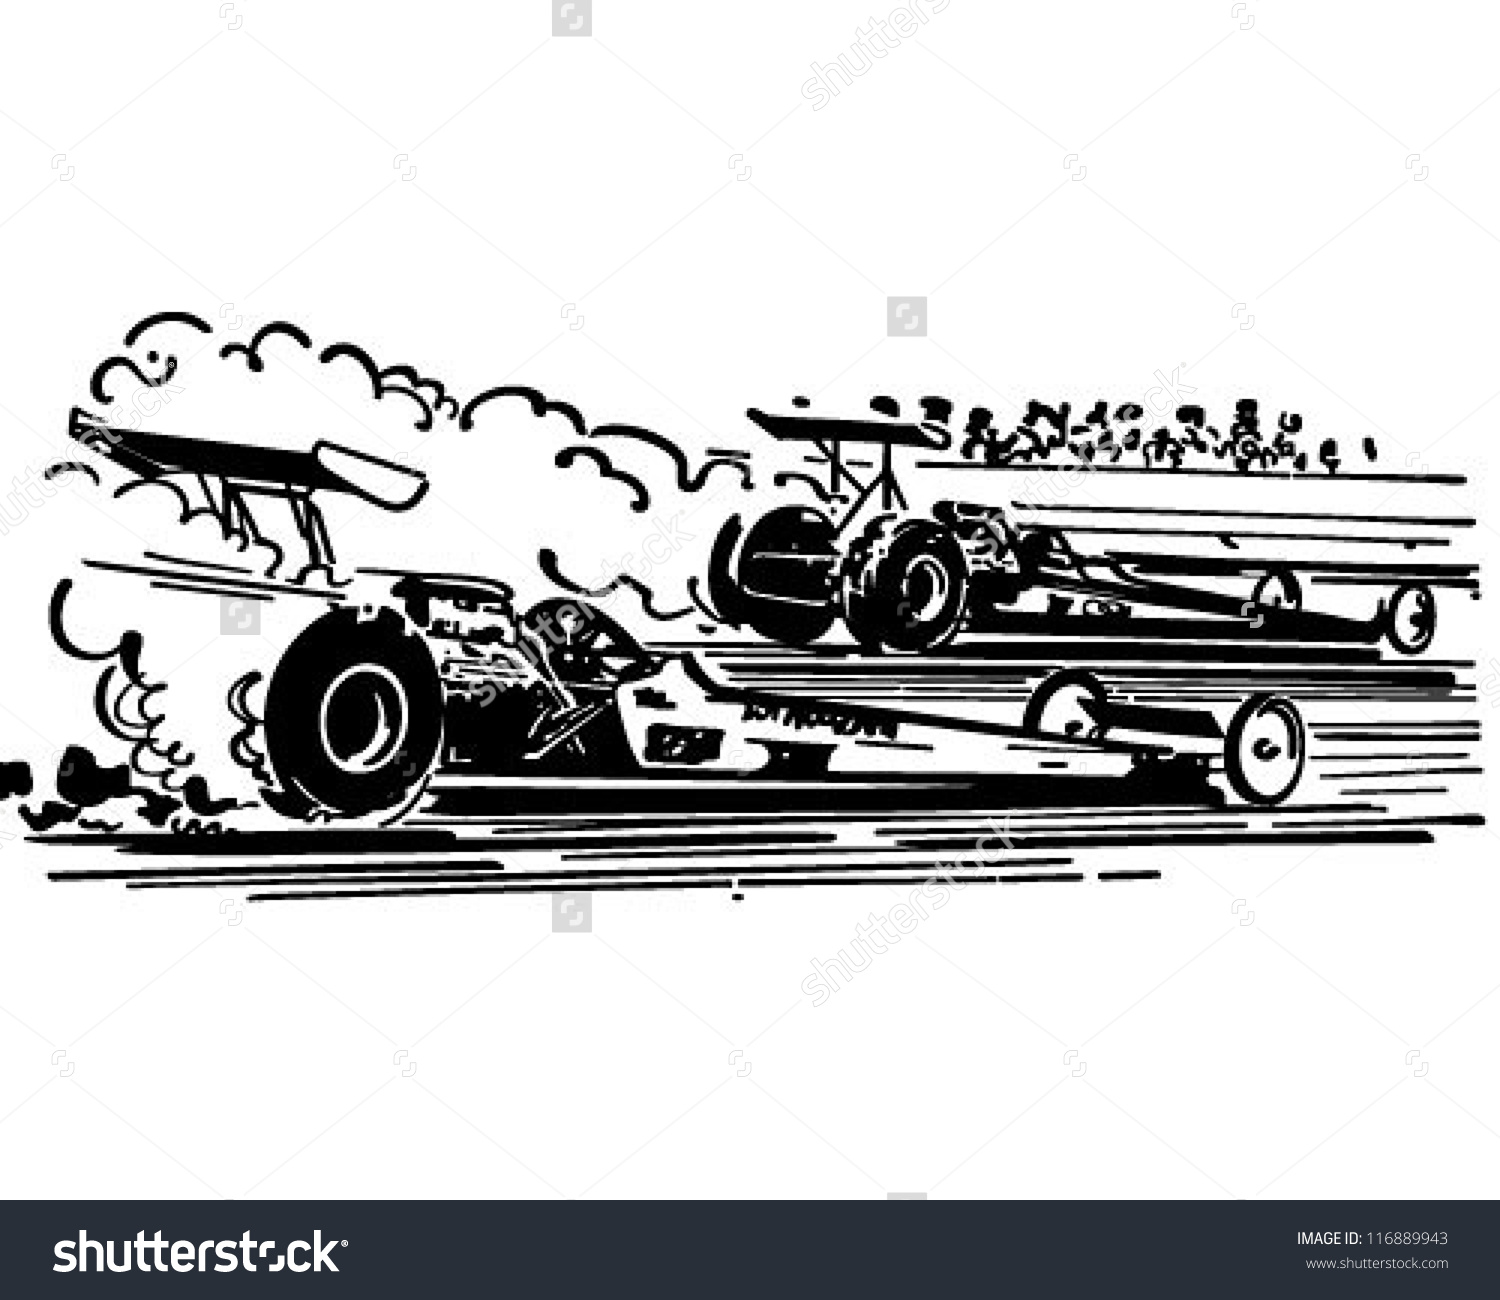 Engine clipart drag racing. 